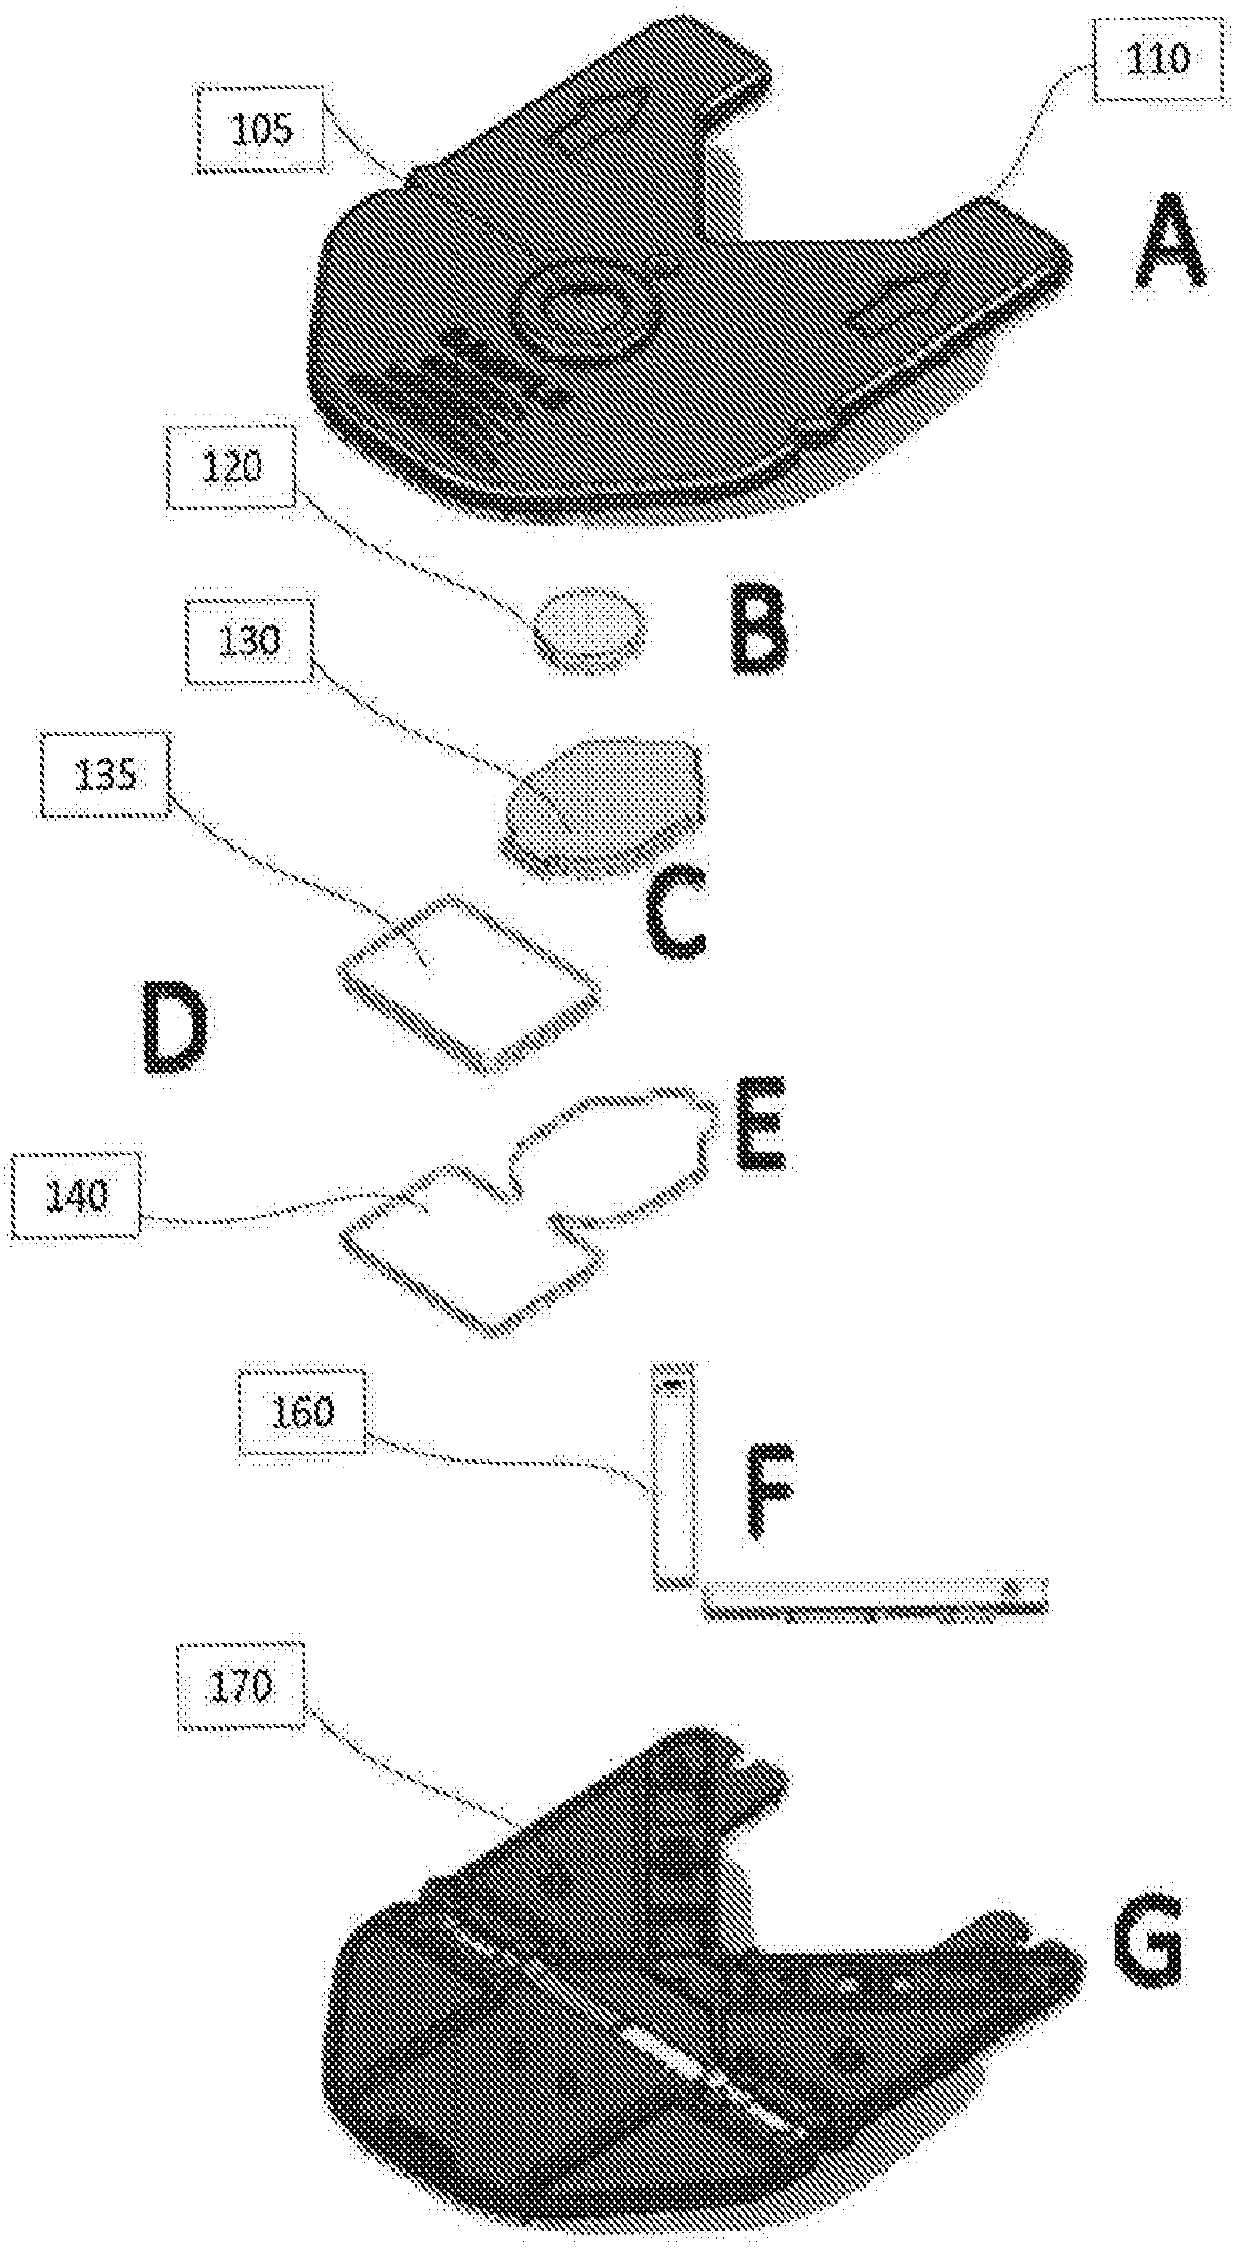 Systems and methods for combined vertical/lateral flow blood separation technologies with cotinine detection